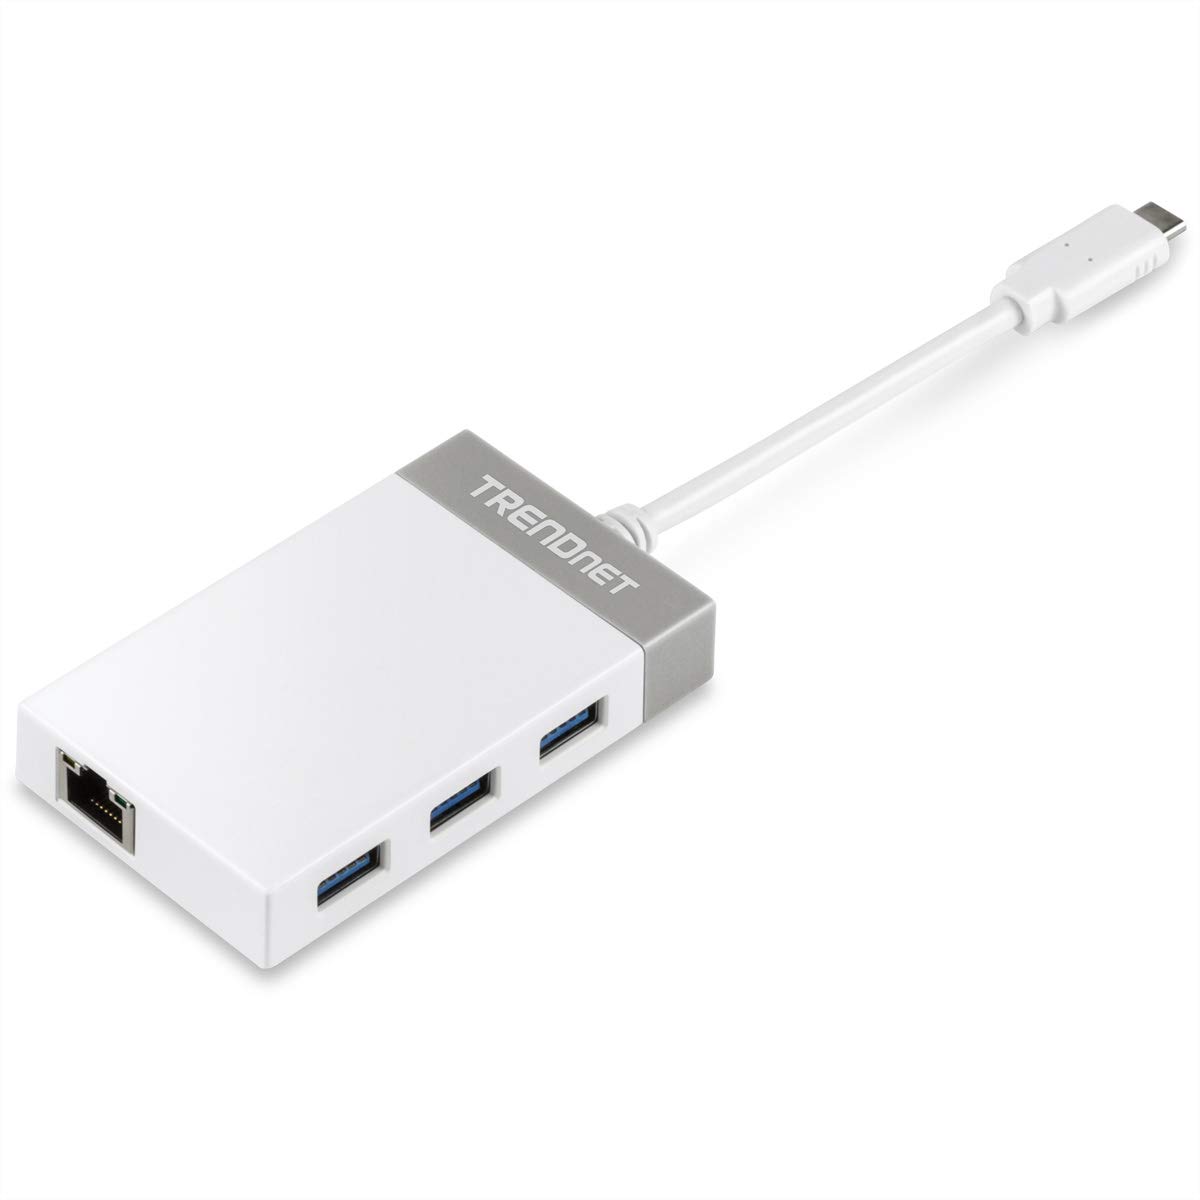 USB-C TO GB ETHERNET ADAPTER